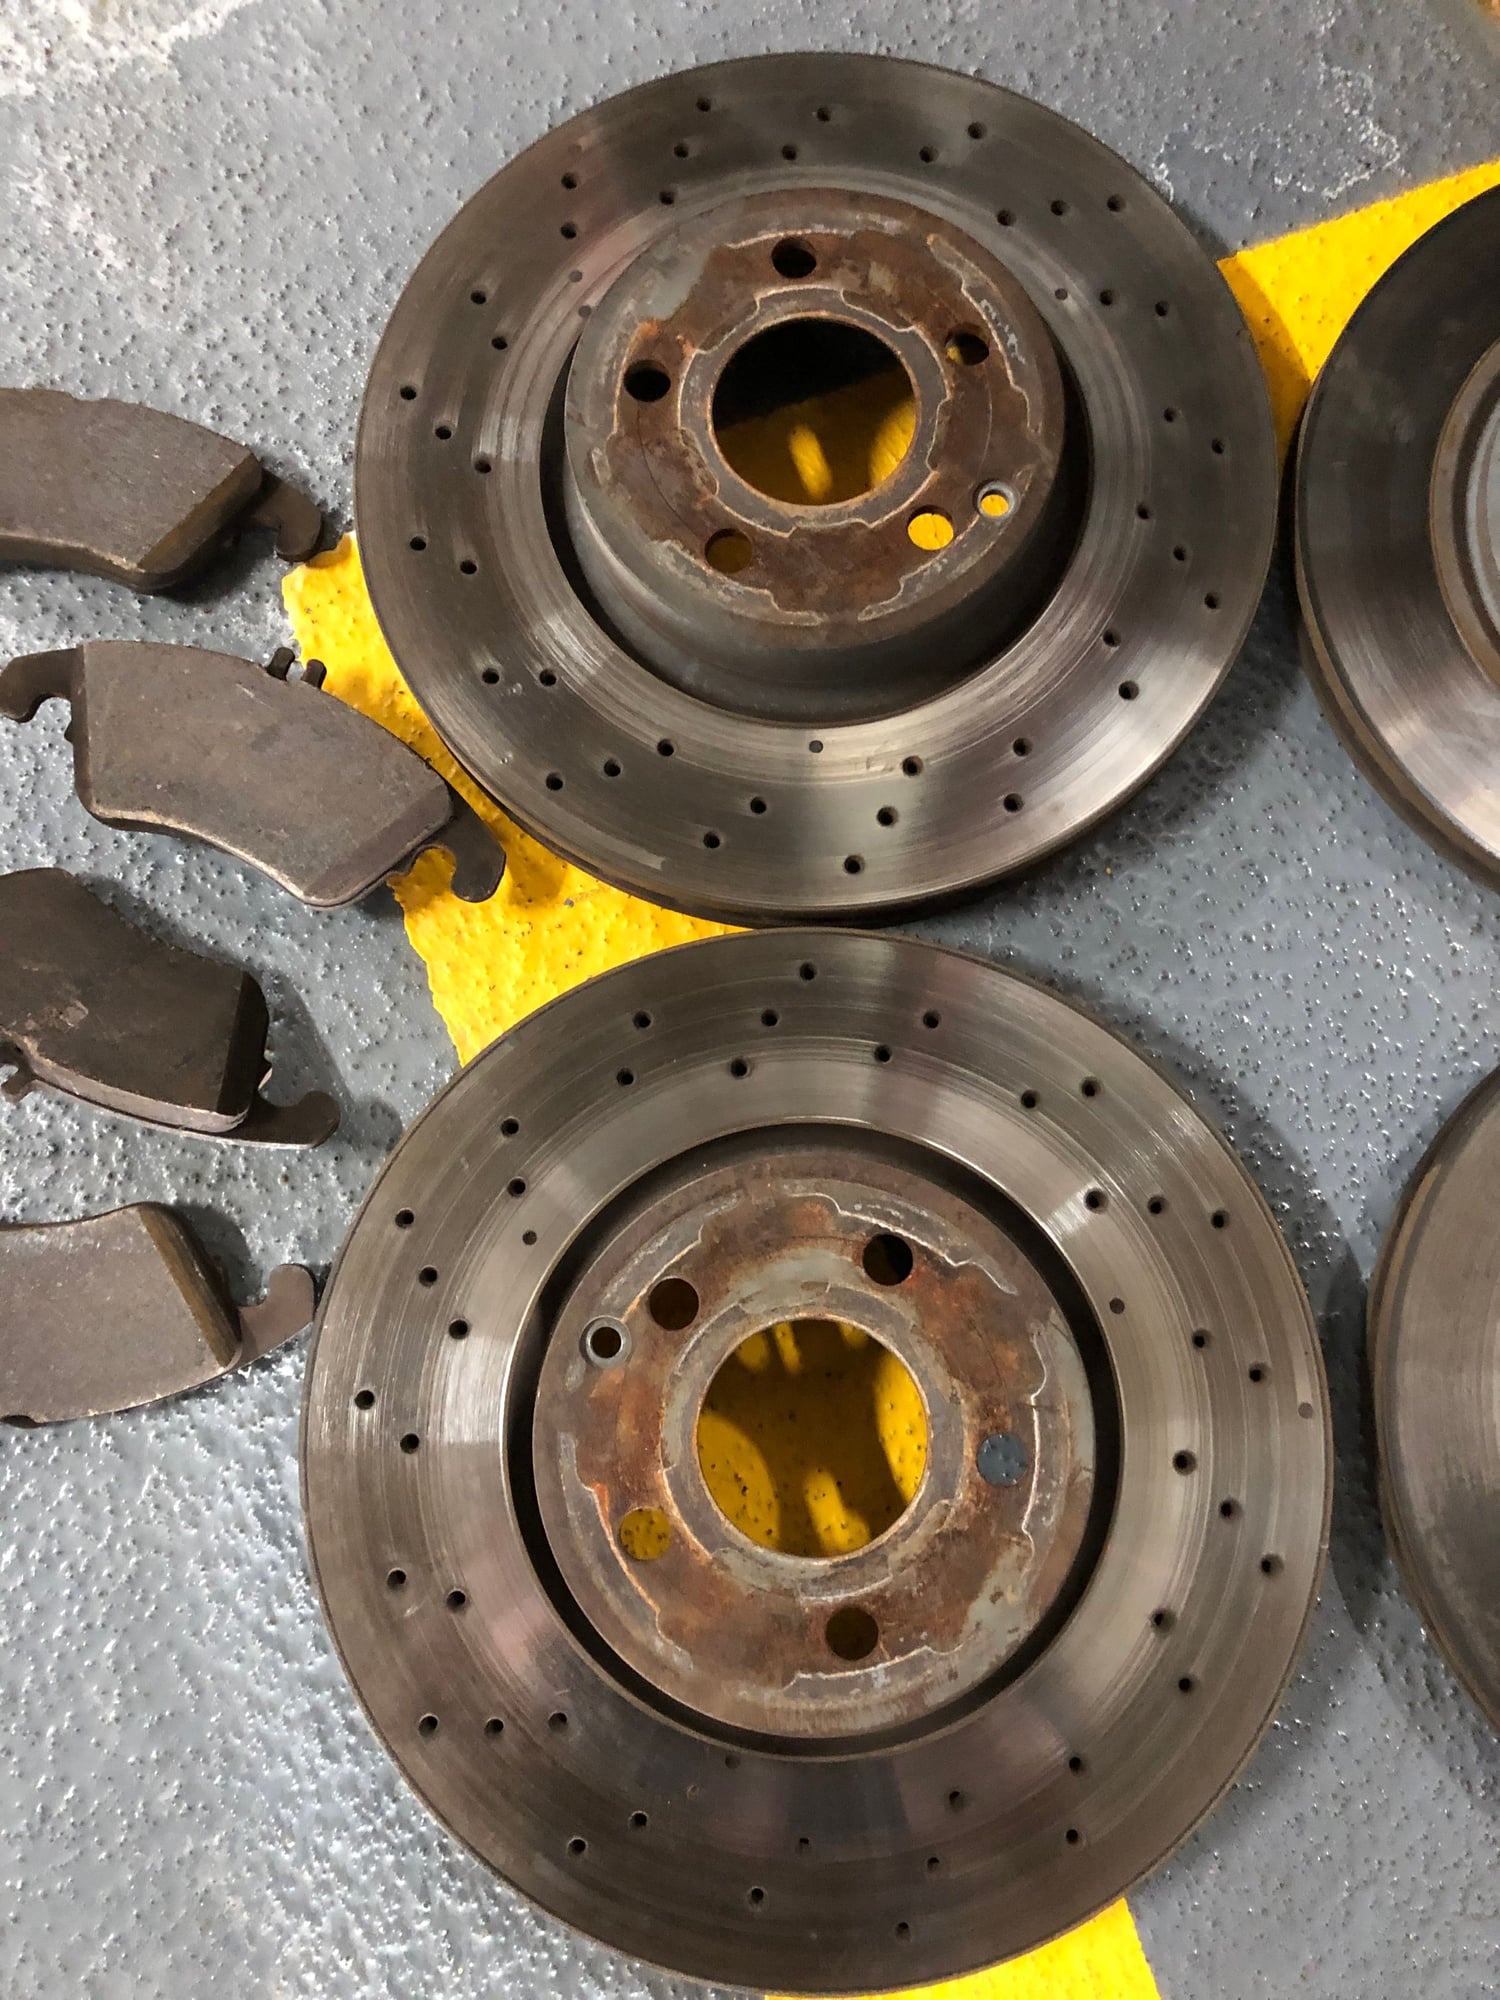 Brakes - Front & Rear Rotors and Pads 2014 C300 with 46,654miles - Used - 2012 to 2014 Mercedes-Benz C300 - Chicago, IL 60605, United States